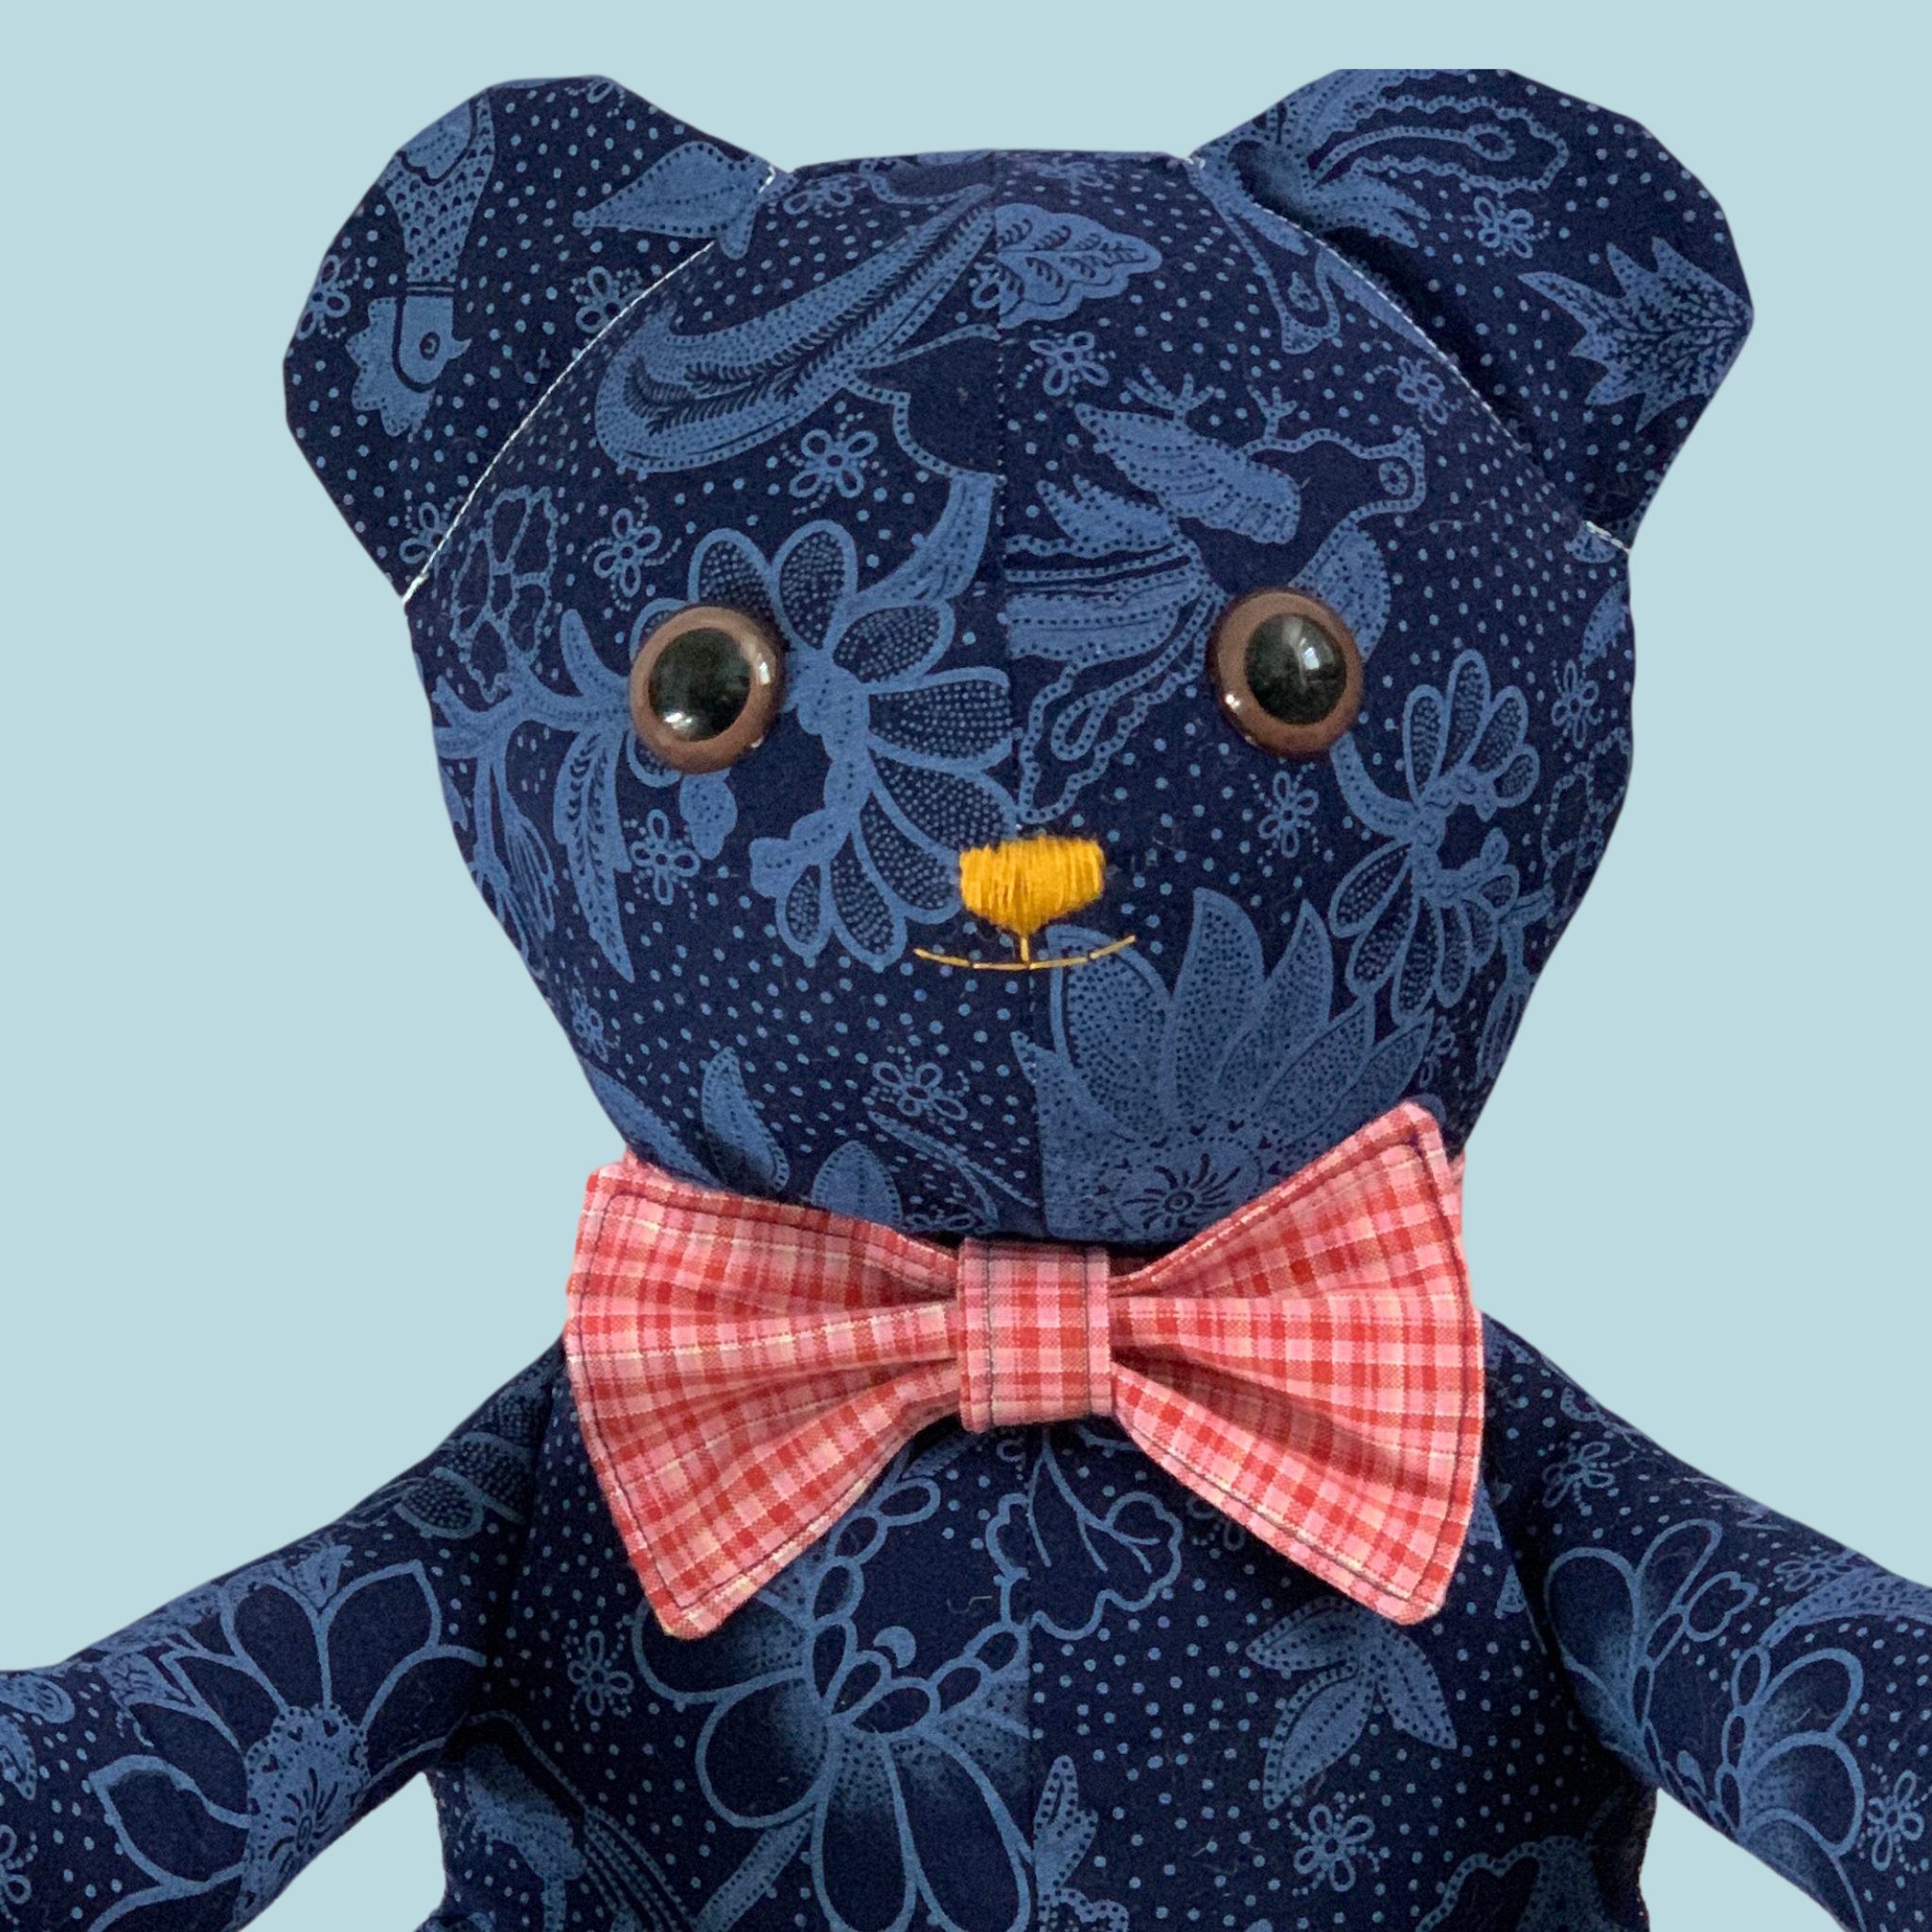 photo of a blue stuffed bear wearing a red plaid bow-tie